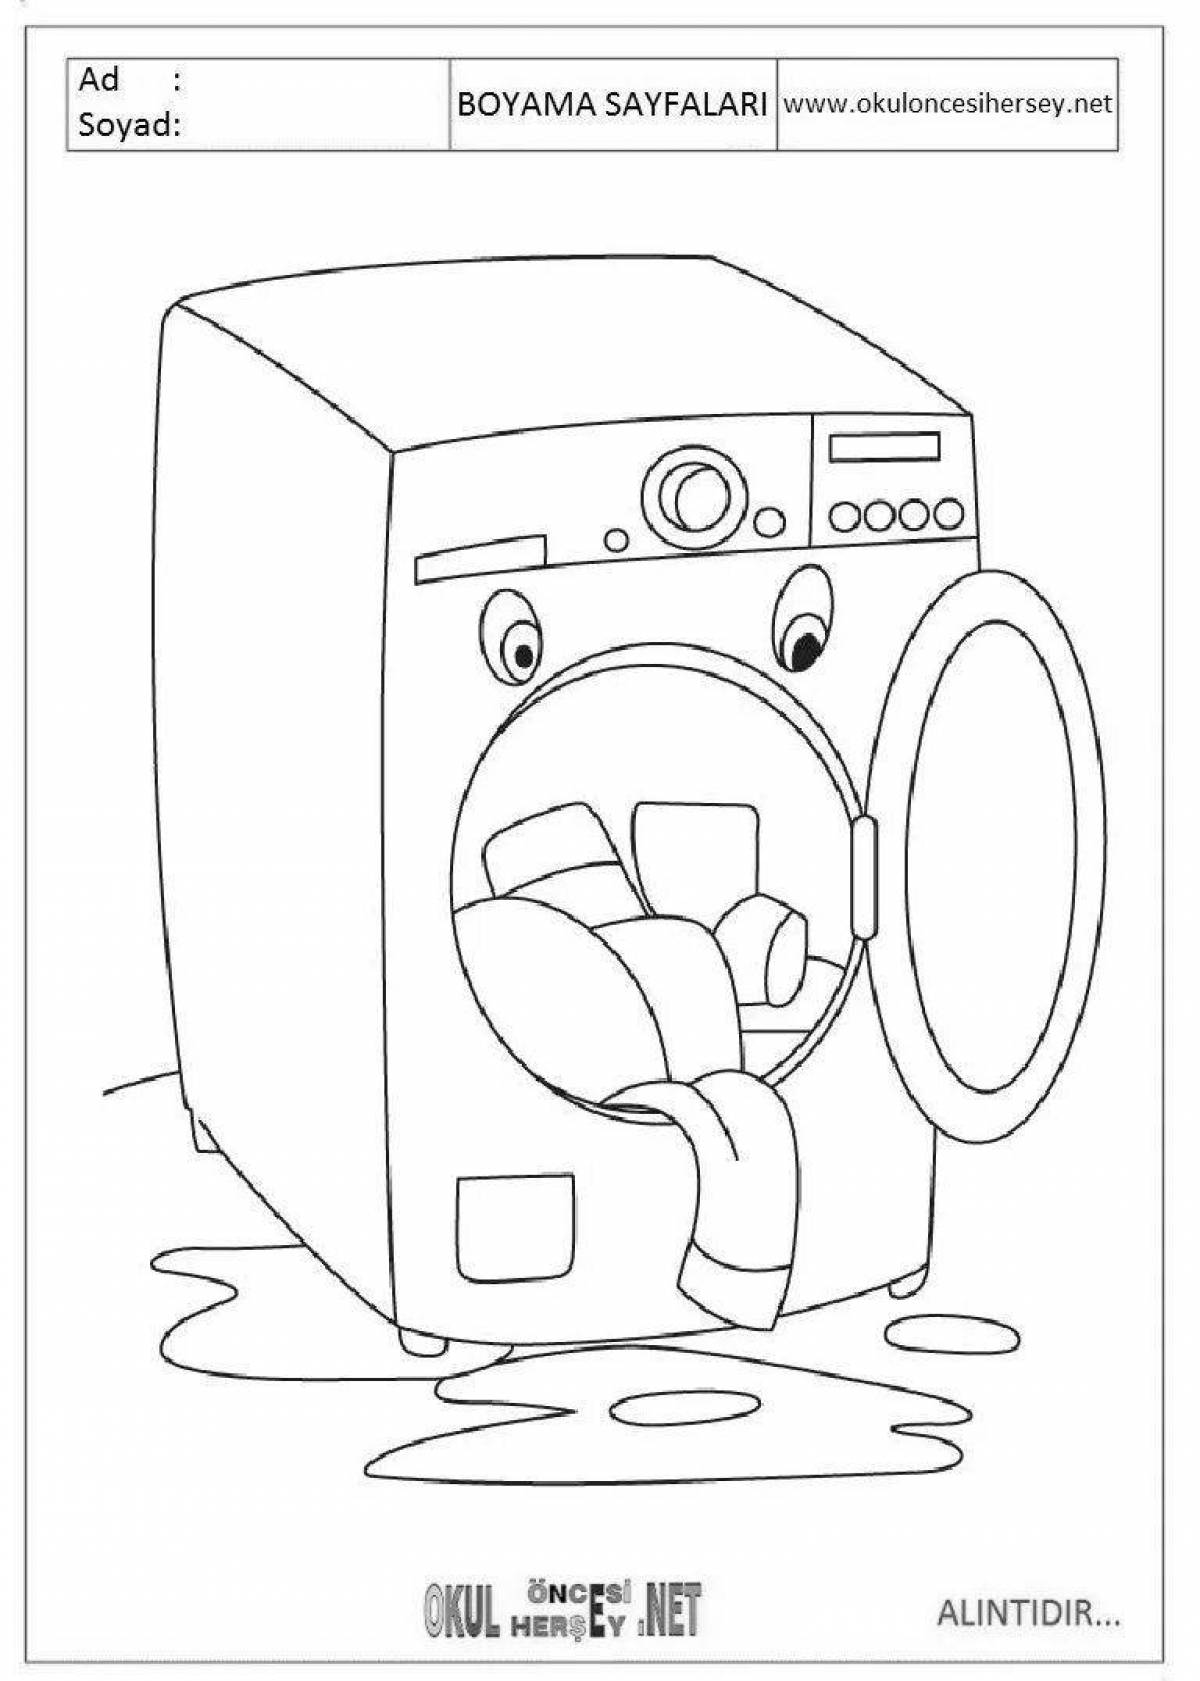 Coloring pages of household appliances for children 3-4 years old